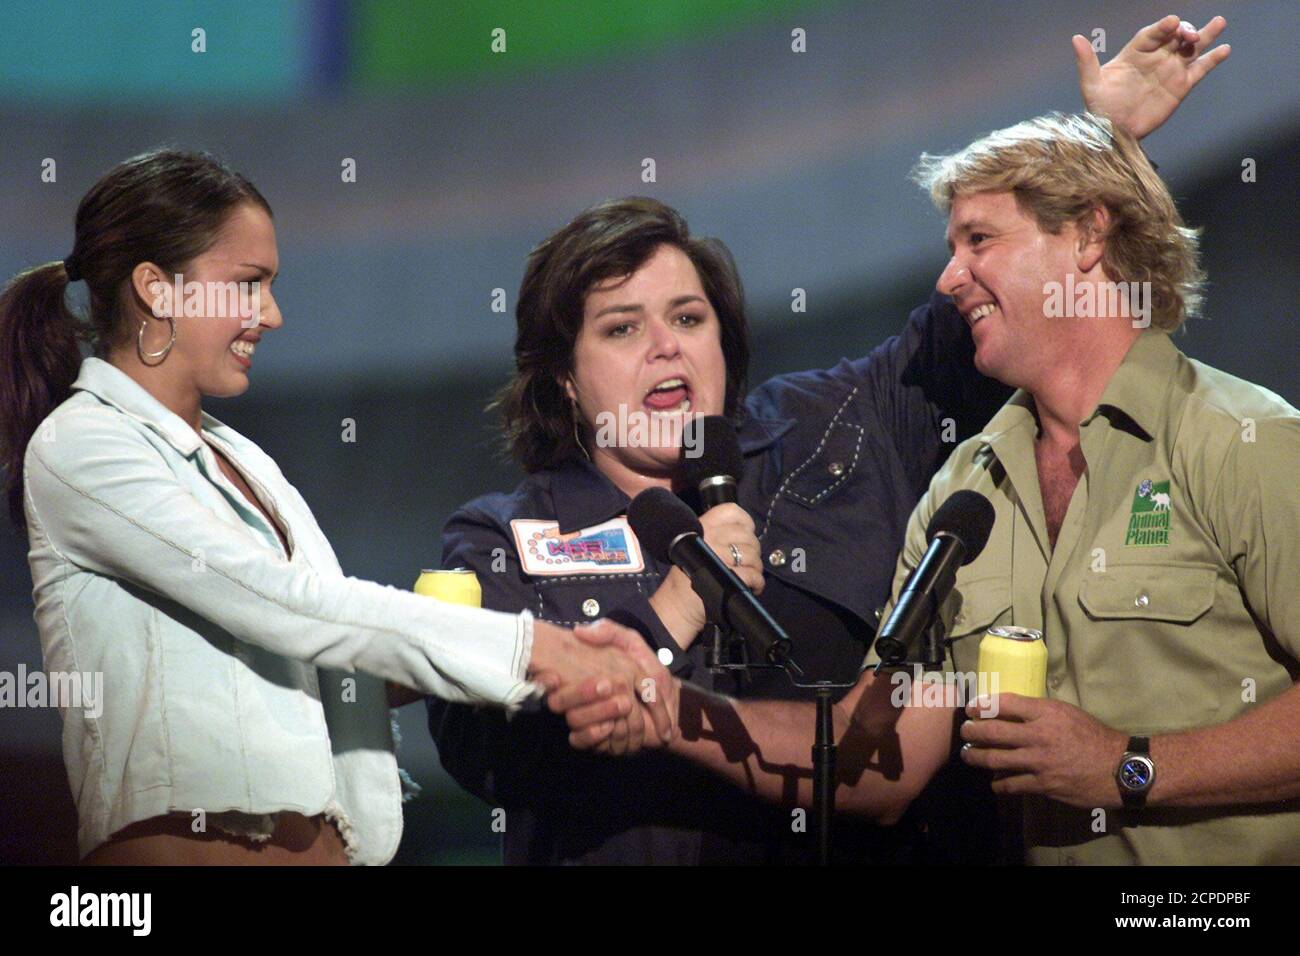 Actress Jessica Alba (L), star of Fox's 'Dark Angel,' shakes hands with Steve Irwin, host of 'The Crocodile Hunter,' as host Rosie O'Donnell announces a tie while presenting the Favorite Burp Award at Nickelodeon's 15th annual Kids' Choice Awards in Santa Monica, California on April 20, 2002. REUTERS/Adrees Latif  AL/SV Stock Photo